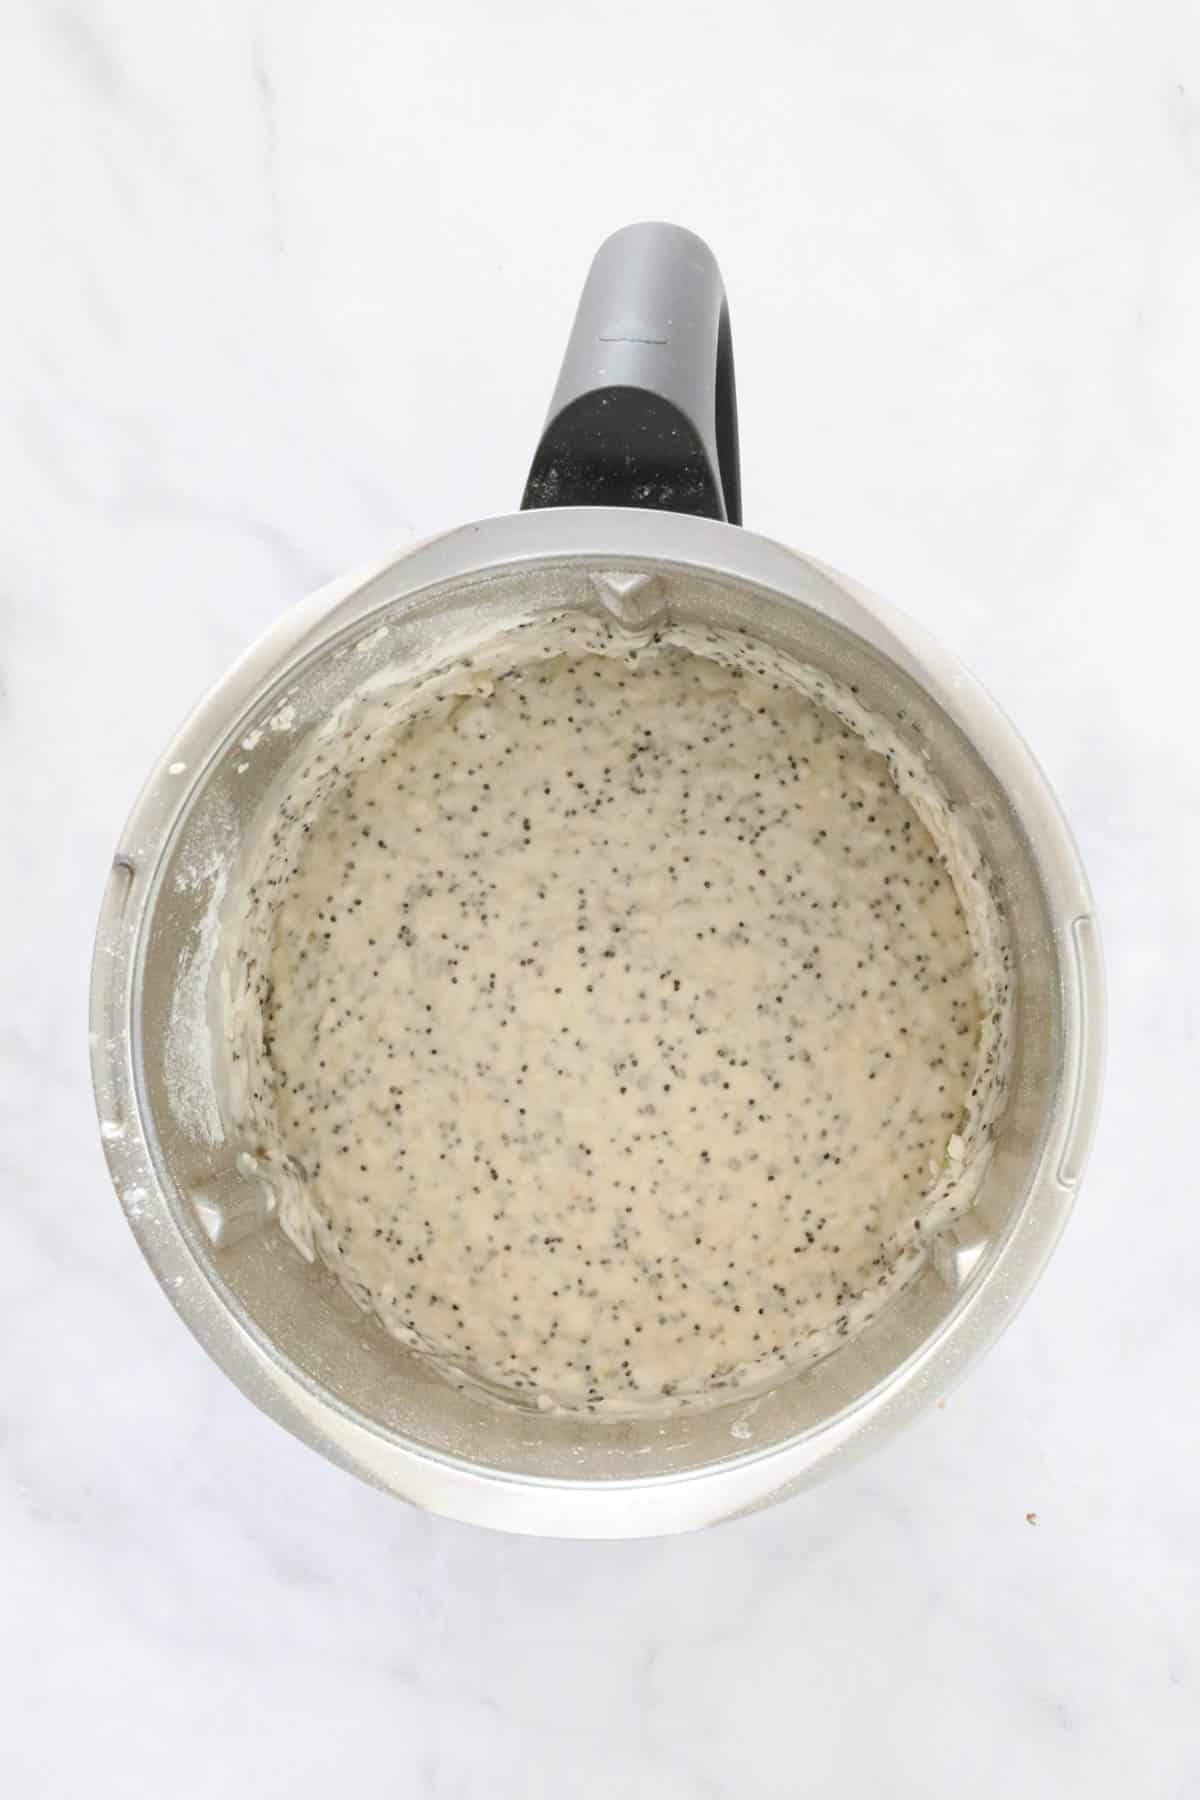 Seed dough in a Thermomix.